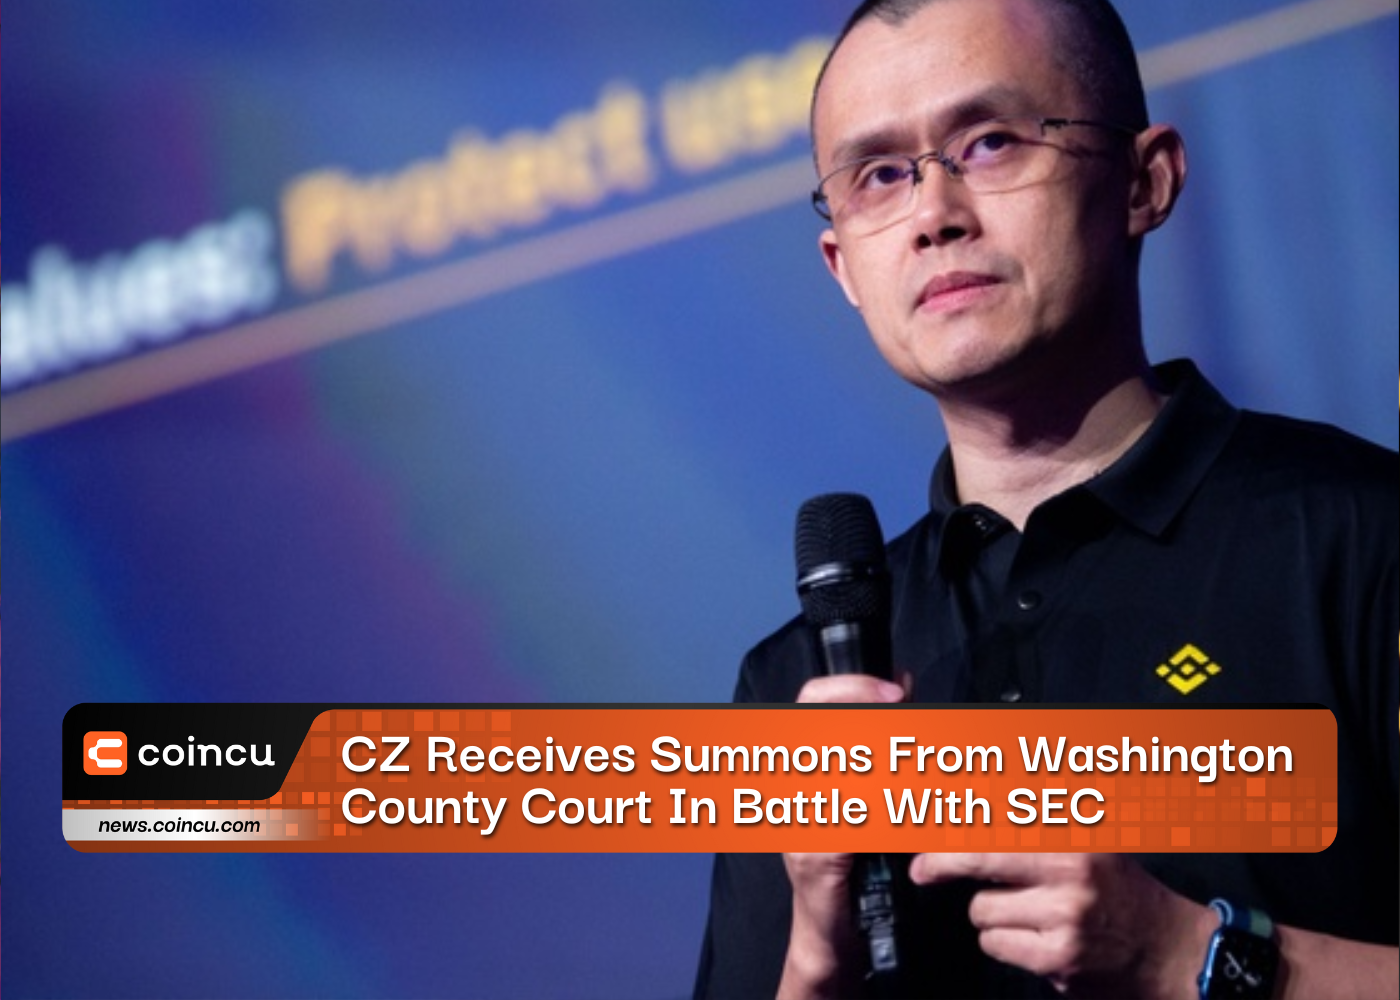 CZ Receives Summons From Washington County Court In Battle With SEC